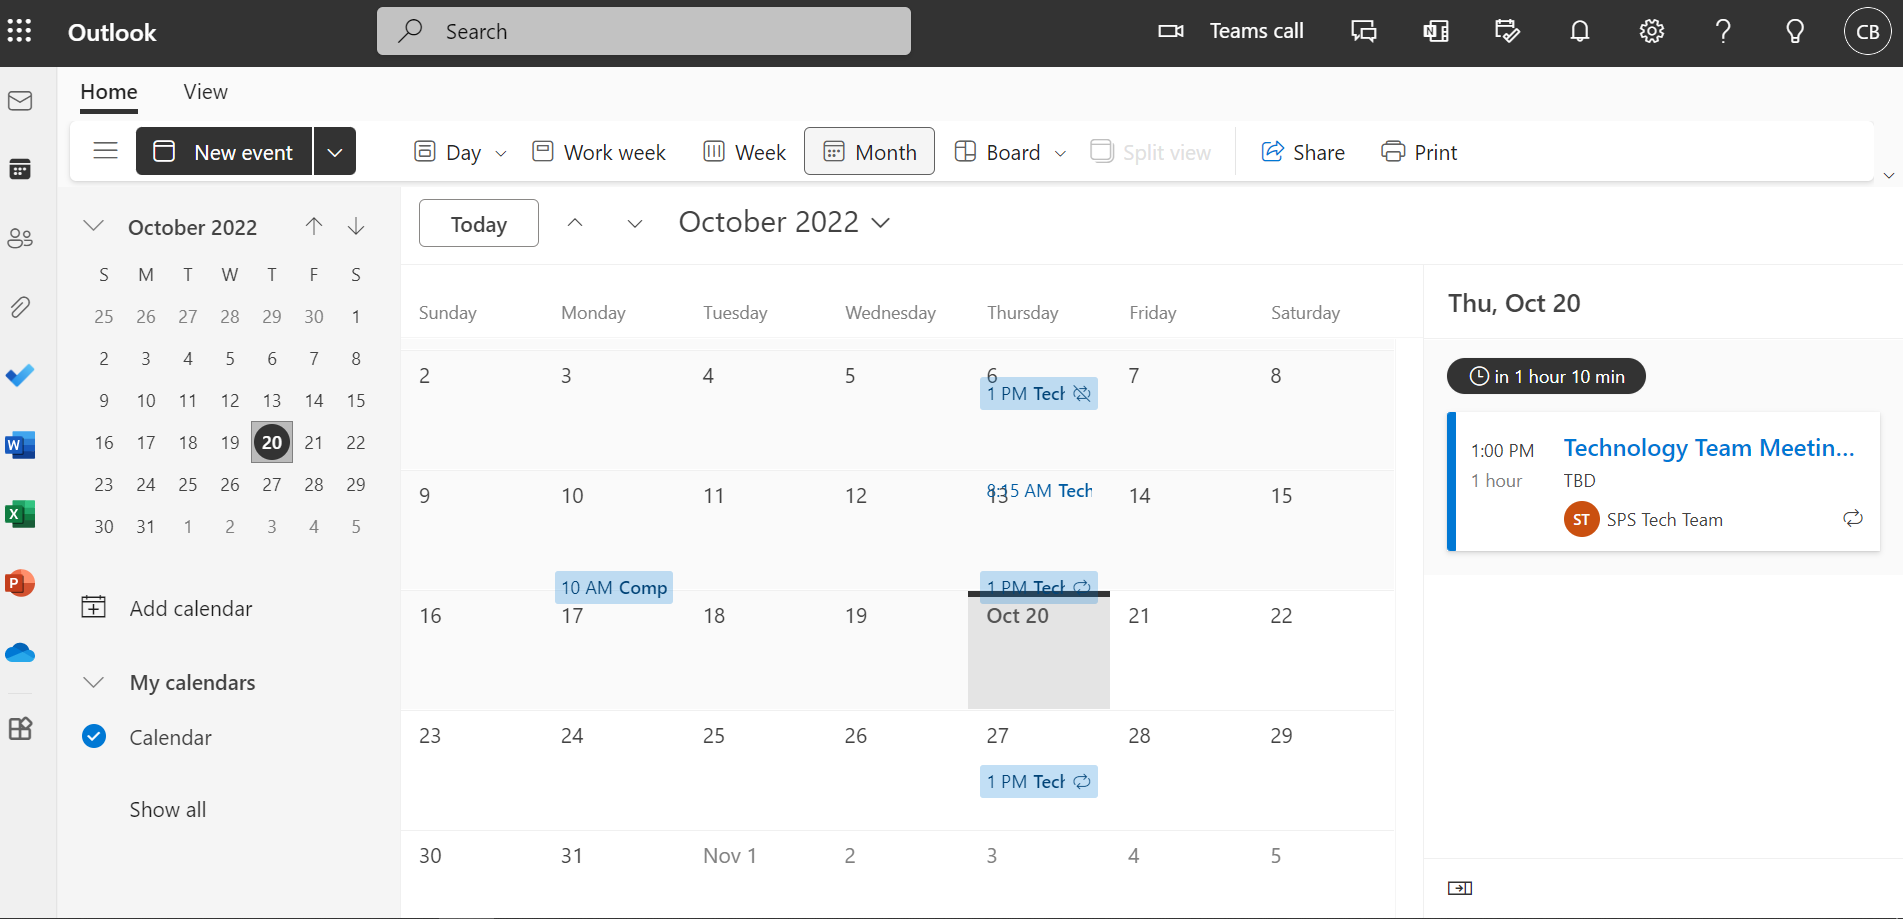 Outlook calendar events not lining up correctly Microsoft Q&A